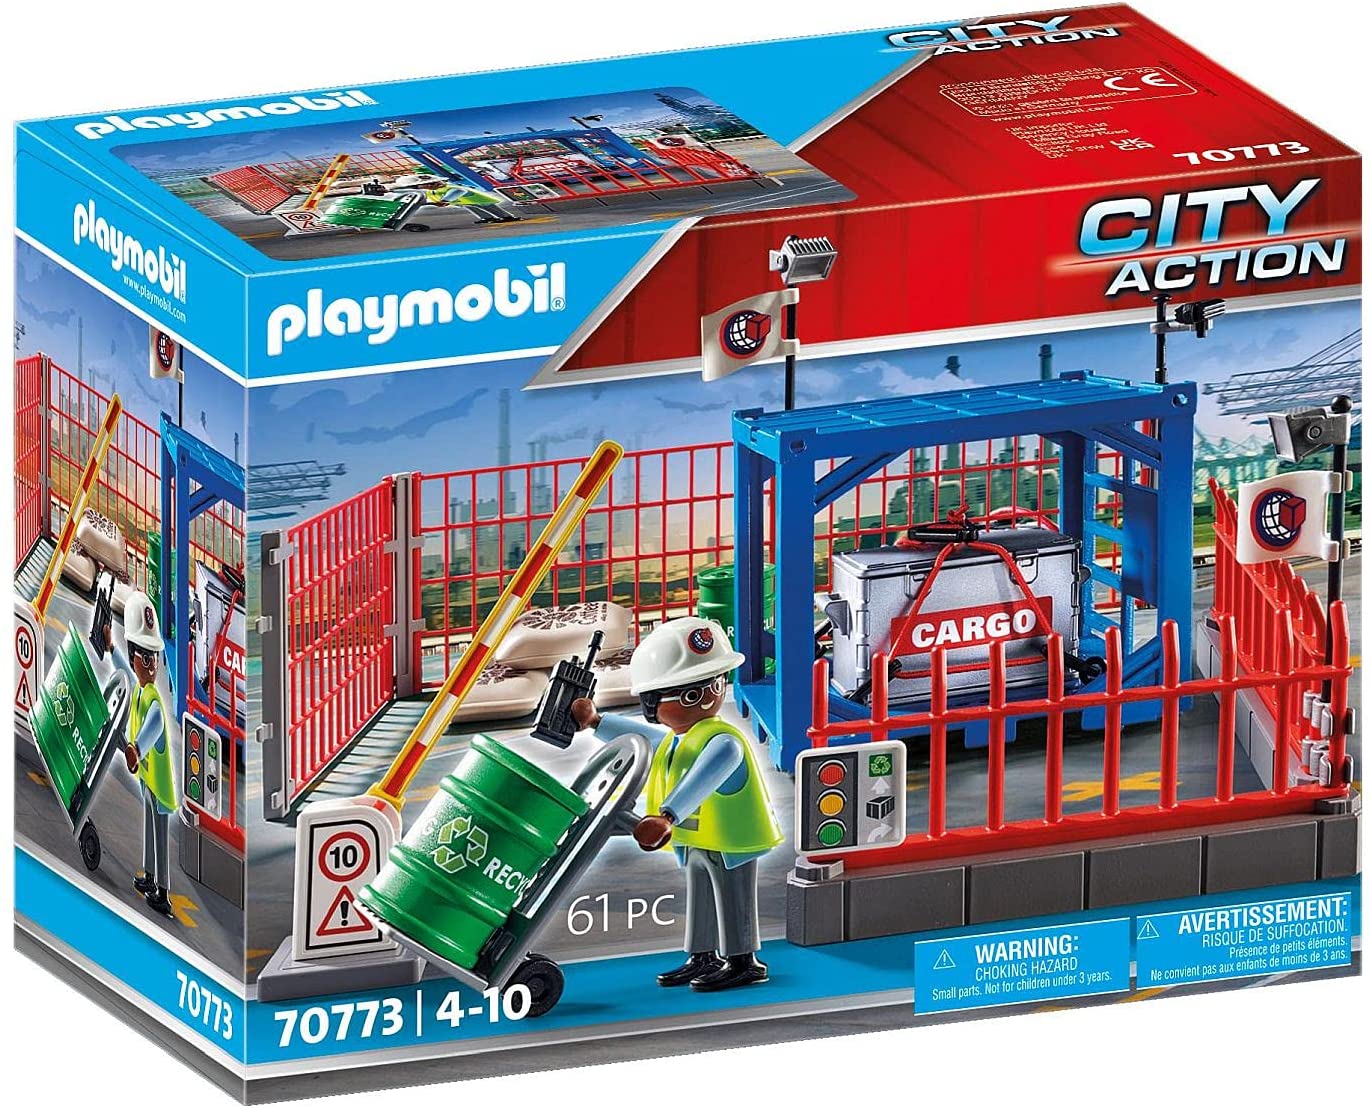 Playmobil City Action 70773 Cargo with Fence Elements and Working Cabinet, 